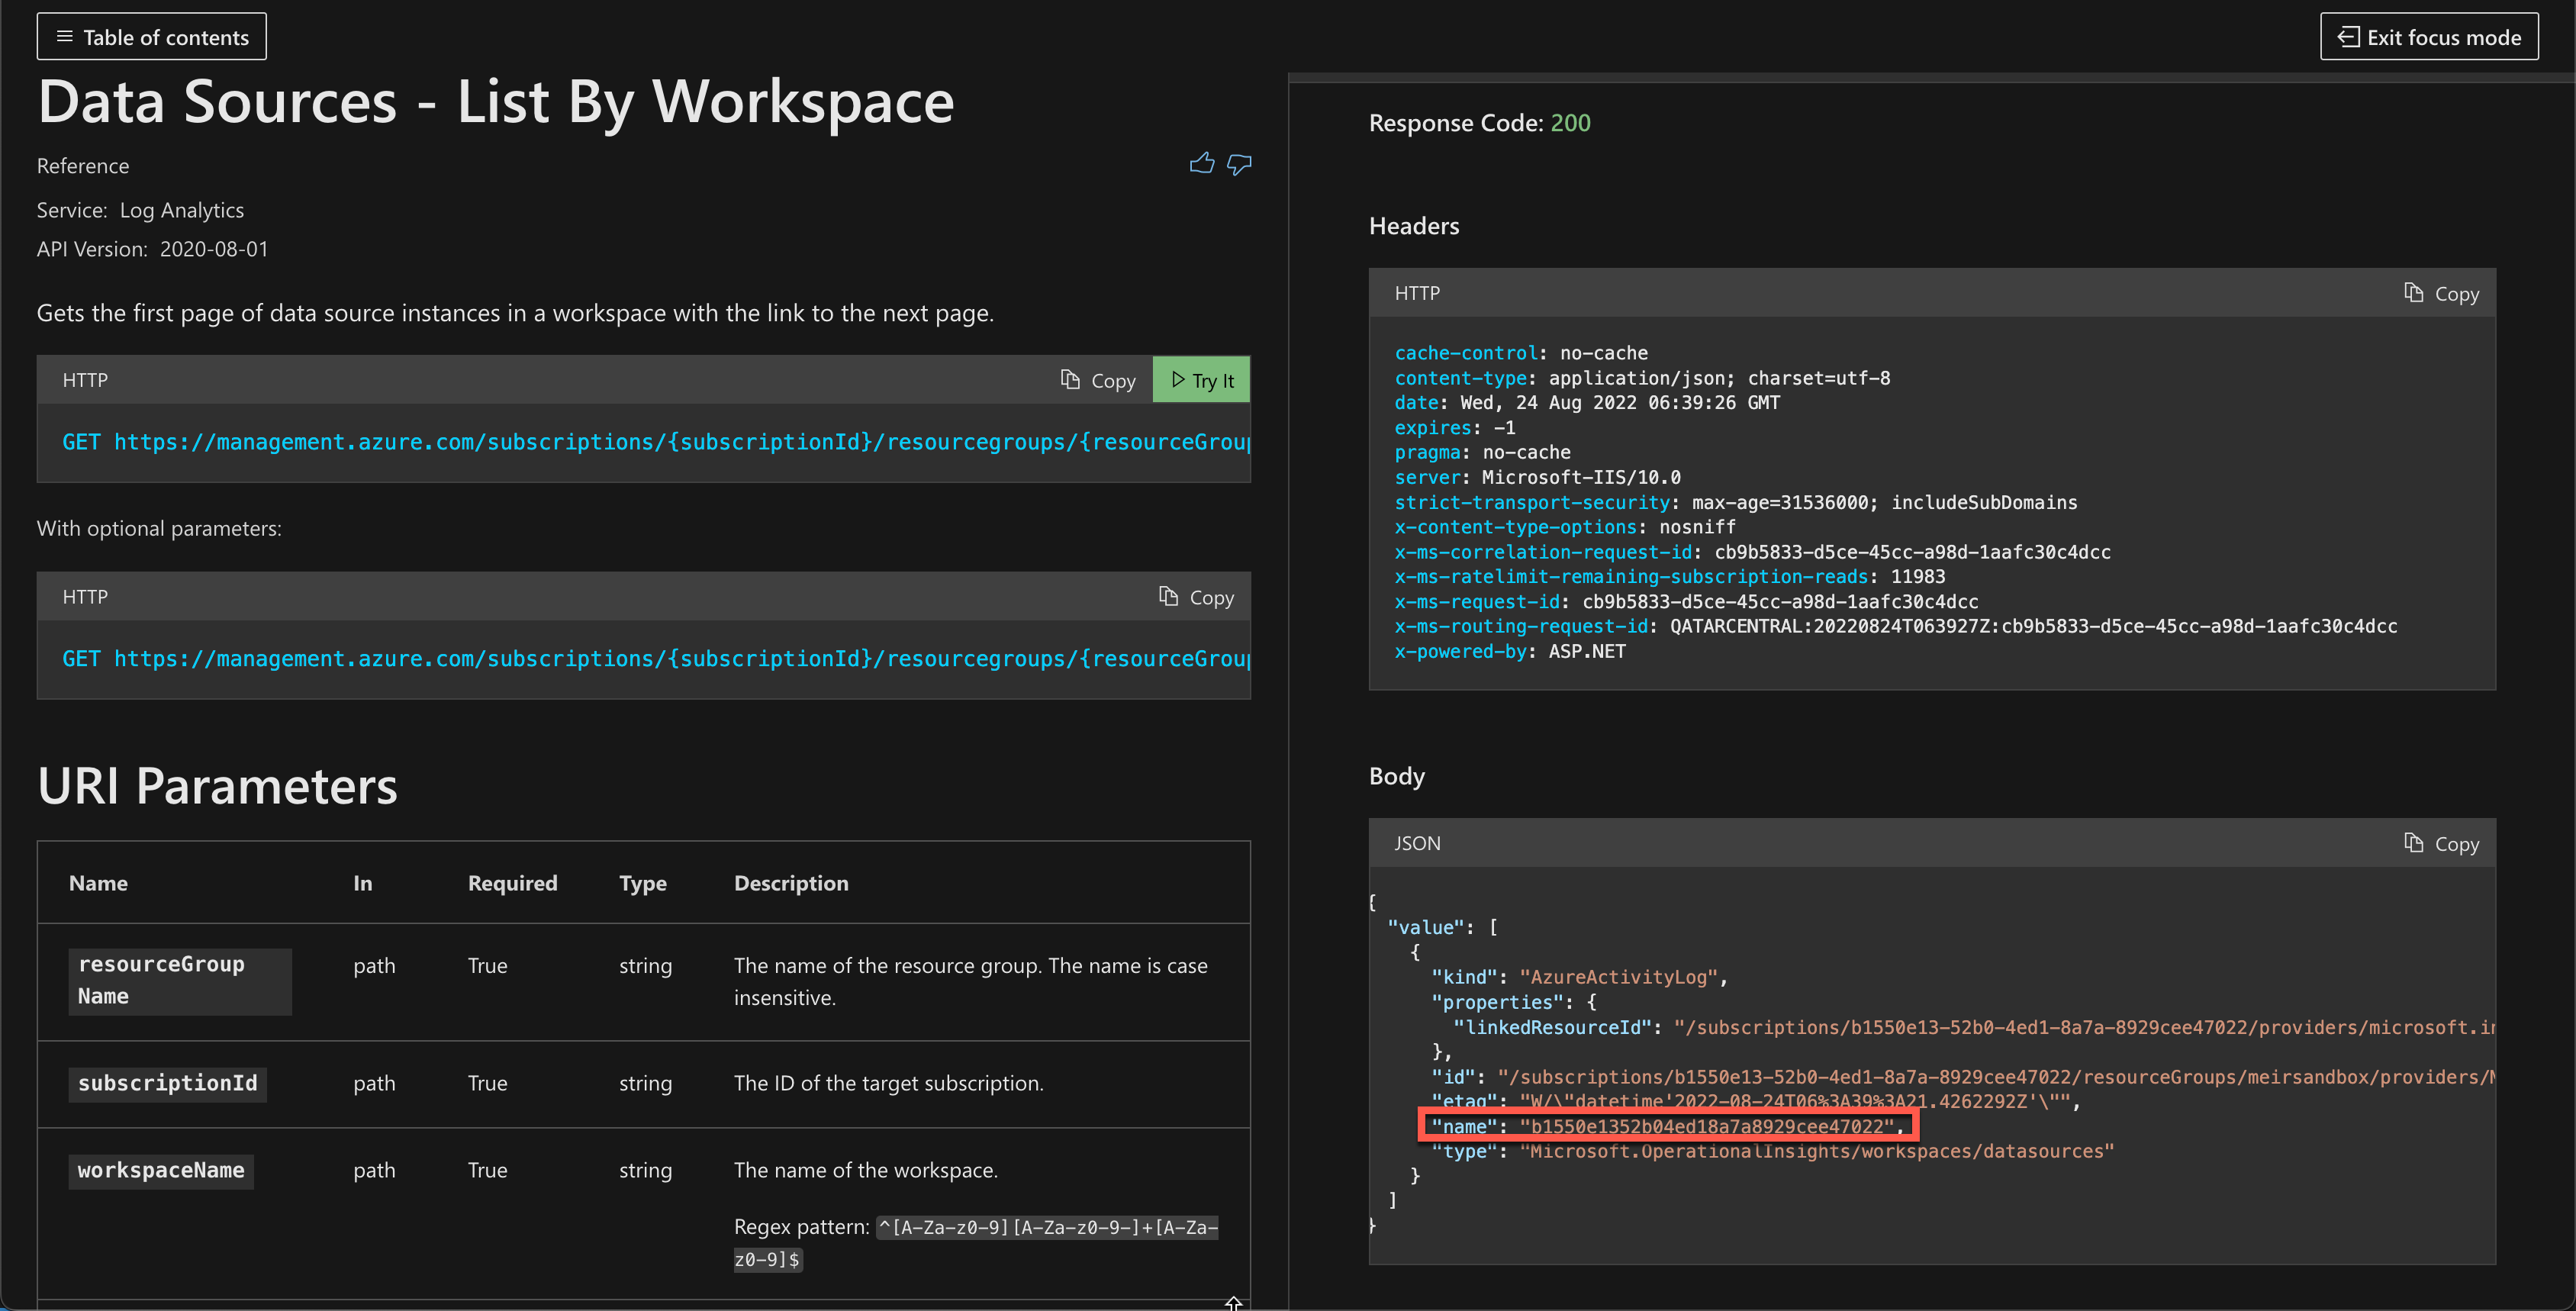 Screenshot showing the connection information you need to copy from the output of the Data Sources - List By Workspace API.